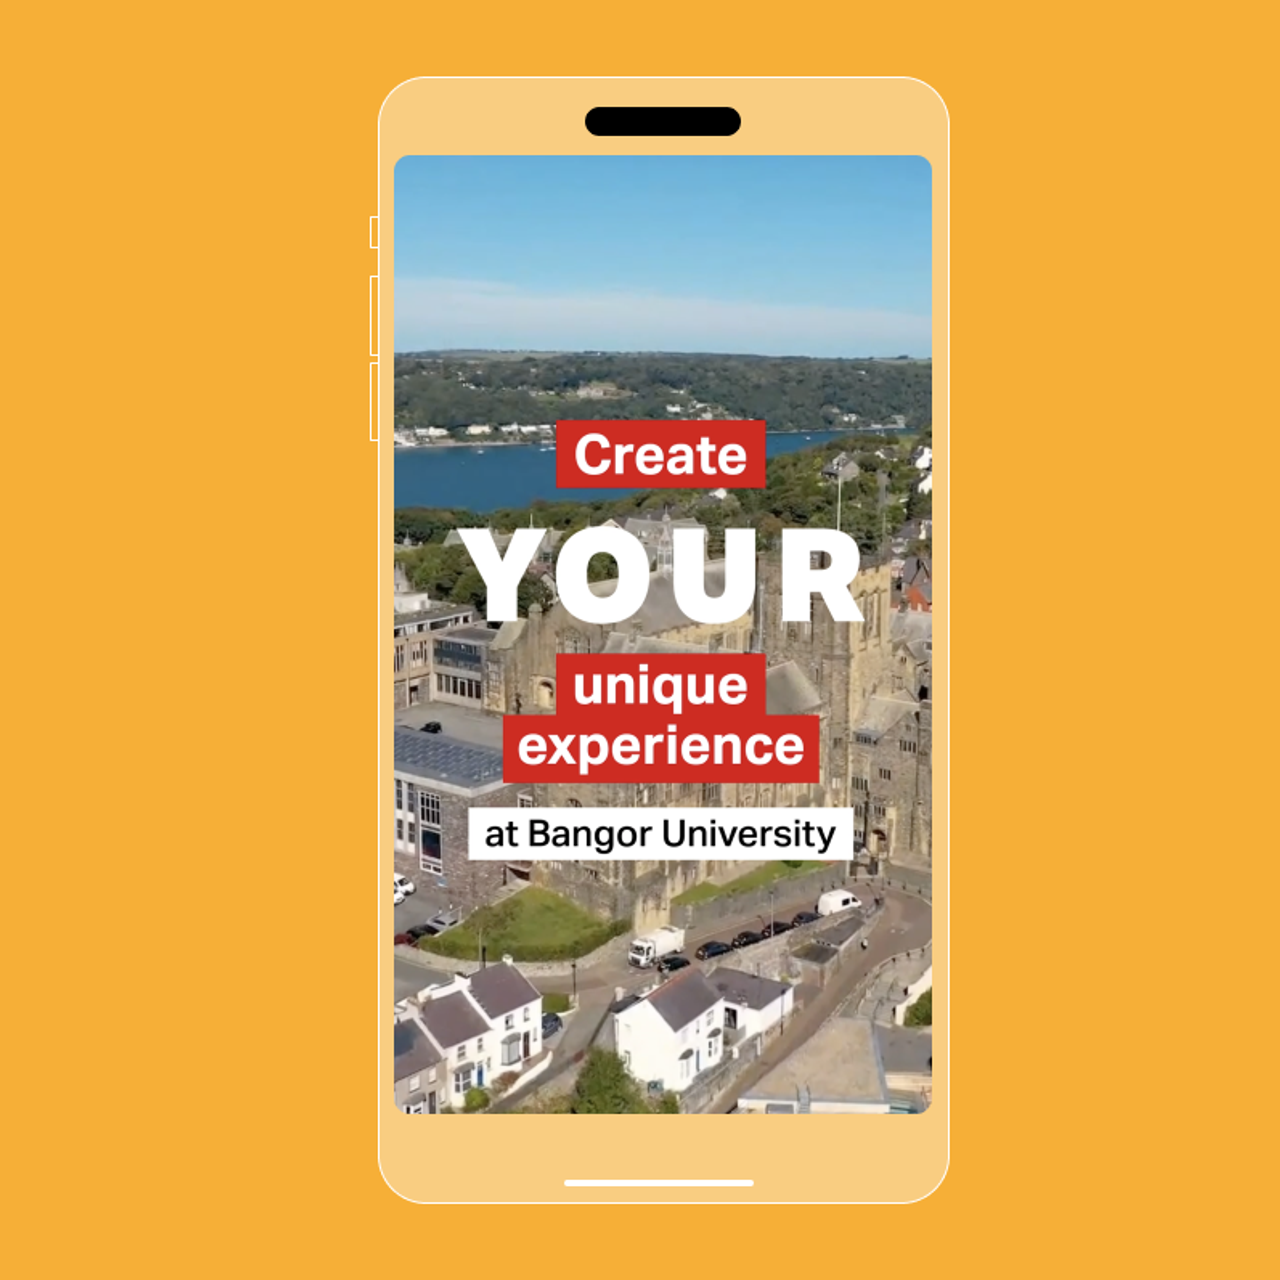 An image of a smartphone displaying an aerial view of Bangor University with 'Create YOUR unique experience' text overlay.